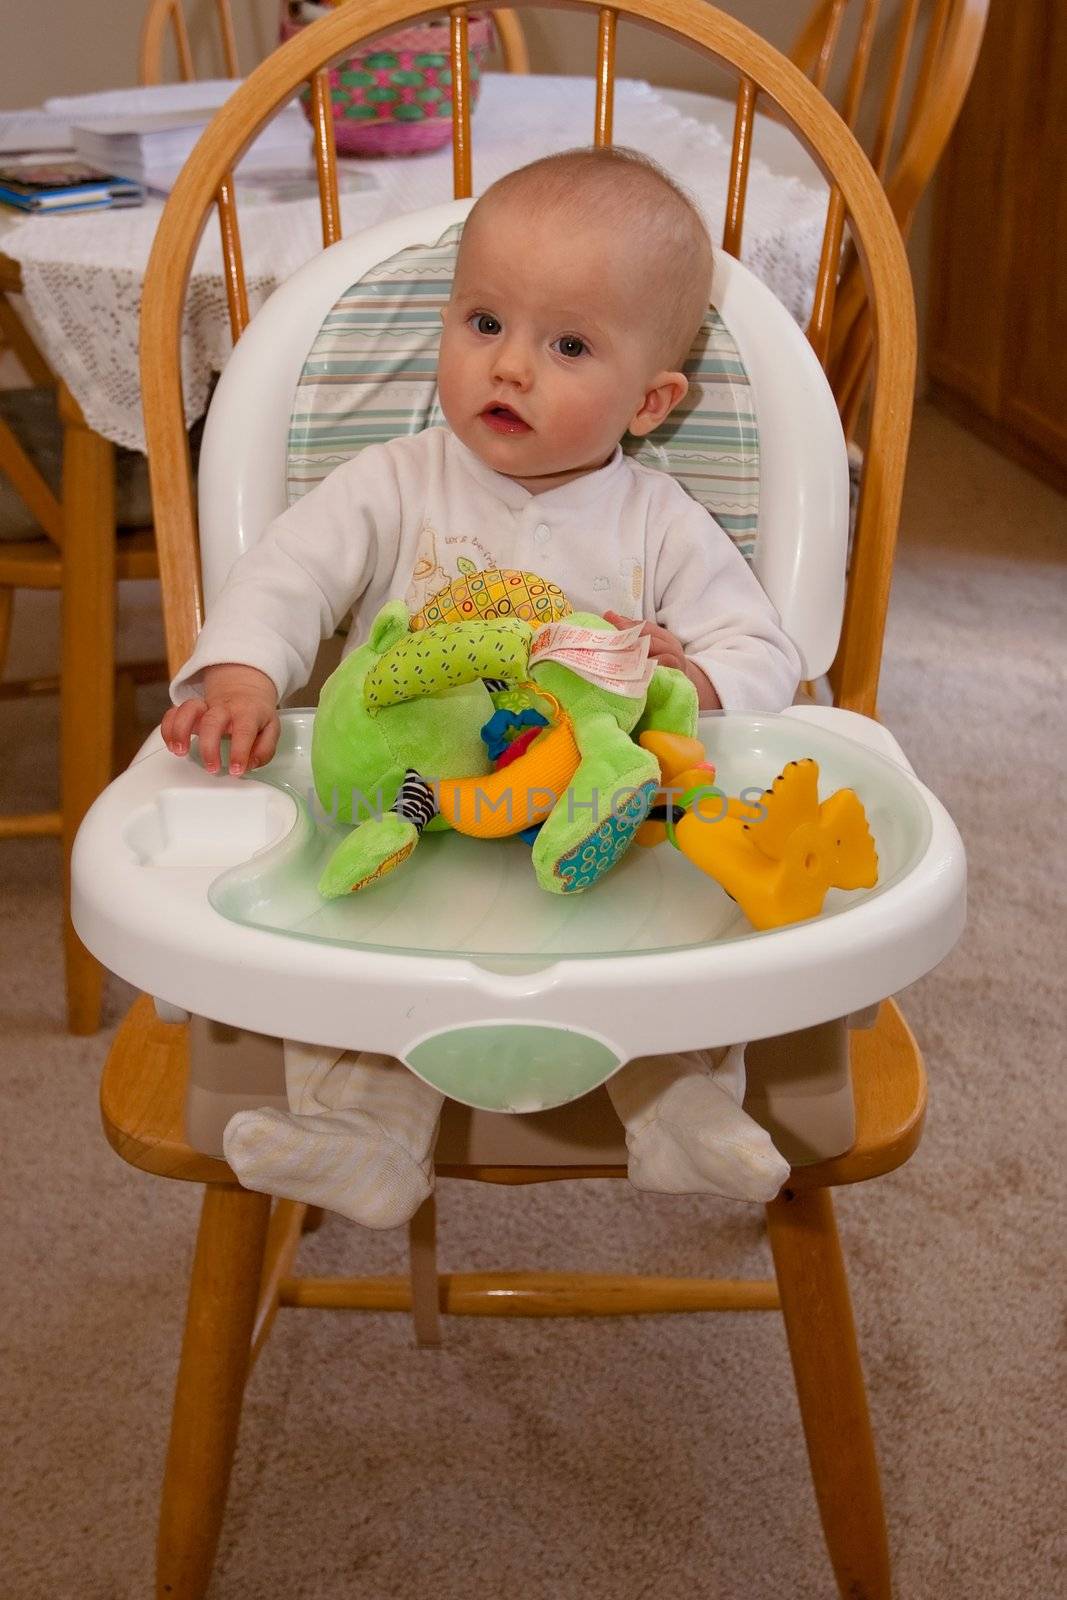 A high chair is a piece of furniture used for feeding older babies and younger toddlers. The seat is raised a fair distance from the ground, so that a person of adult height may spoon-feed the child comfortably from a standing position.